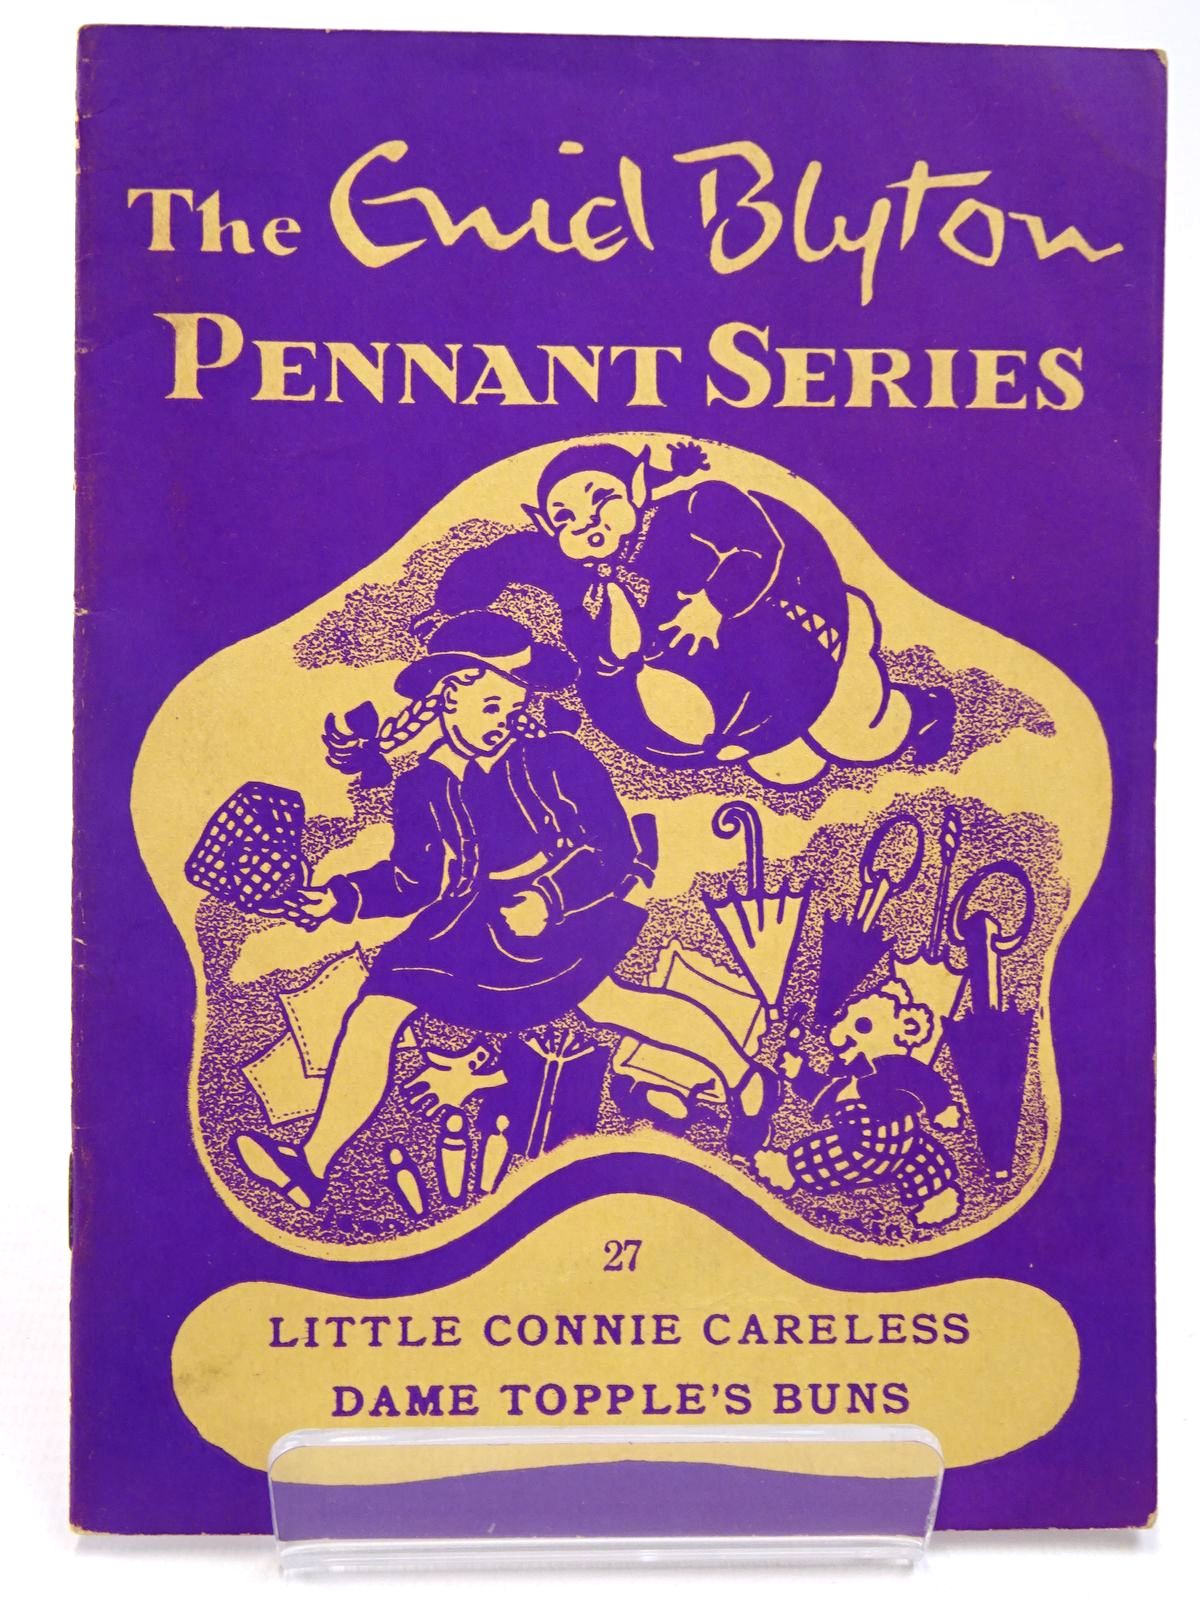 Photo of THE ENID BLYTON PENNANT SERIES No. 27 LITTLE CONNIE CARELESS / DAME TOPPLE'S BUNS written by Blyton, Enid illustrated by Soper, Eileen
Main, Jean published by Macmillan & Co. Ltd. (STOCK CODE: 2130513)  for sale by Stella & Rose's Books